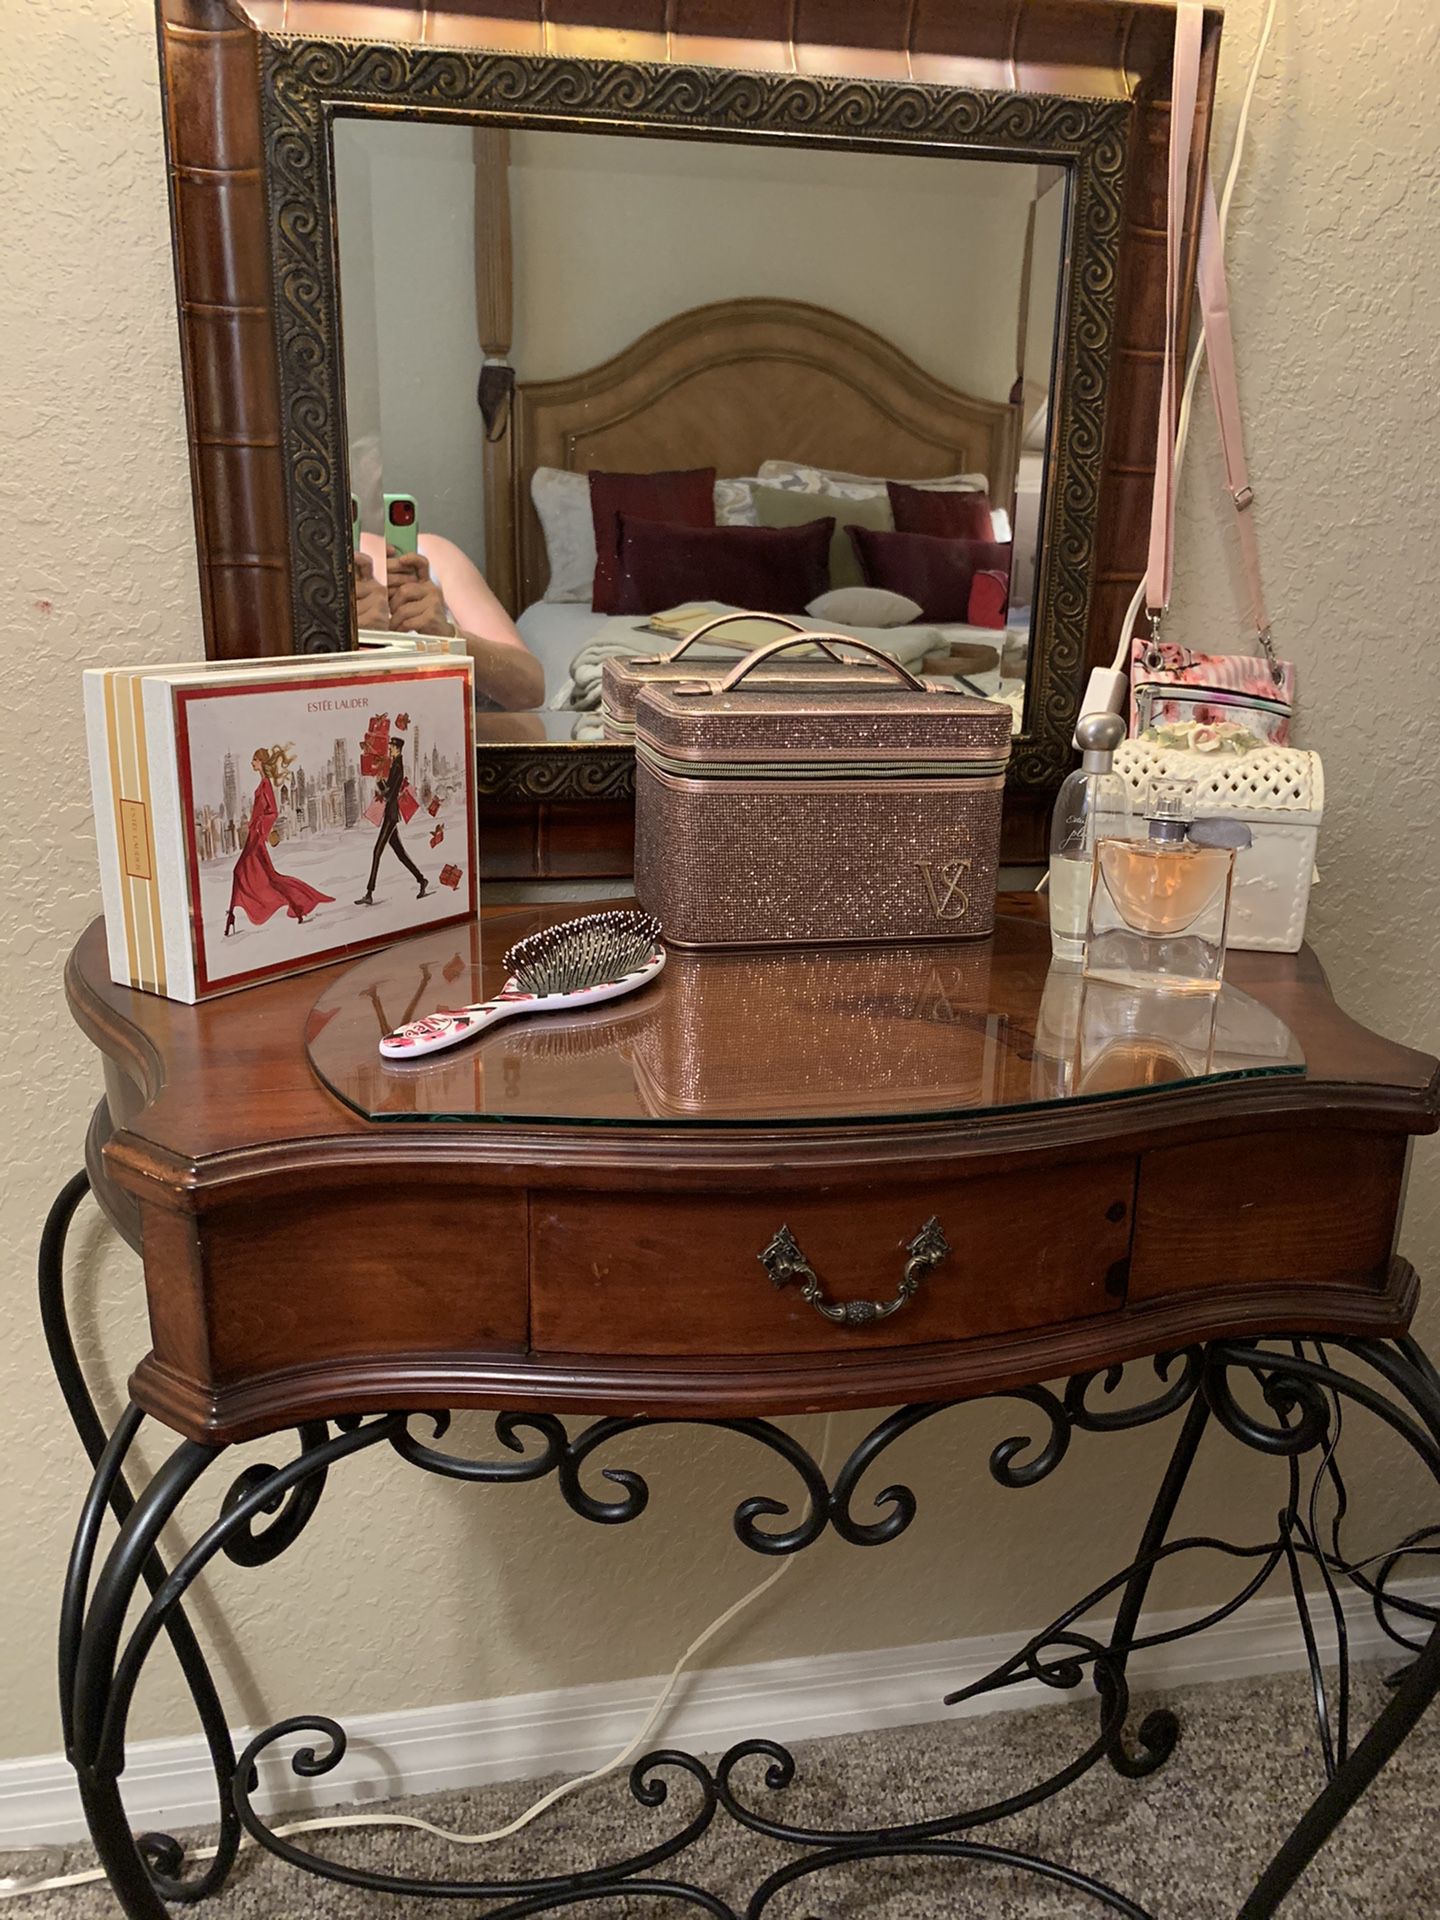 BEAUTIFUL VANITY ,MIRROR, AND PALE PINK ANTIQUE WONDERFUL LIGHT FIXTURE